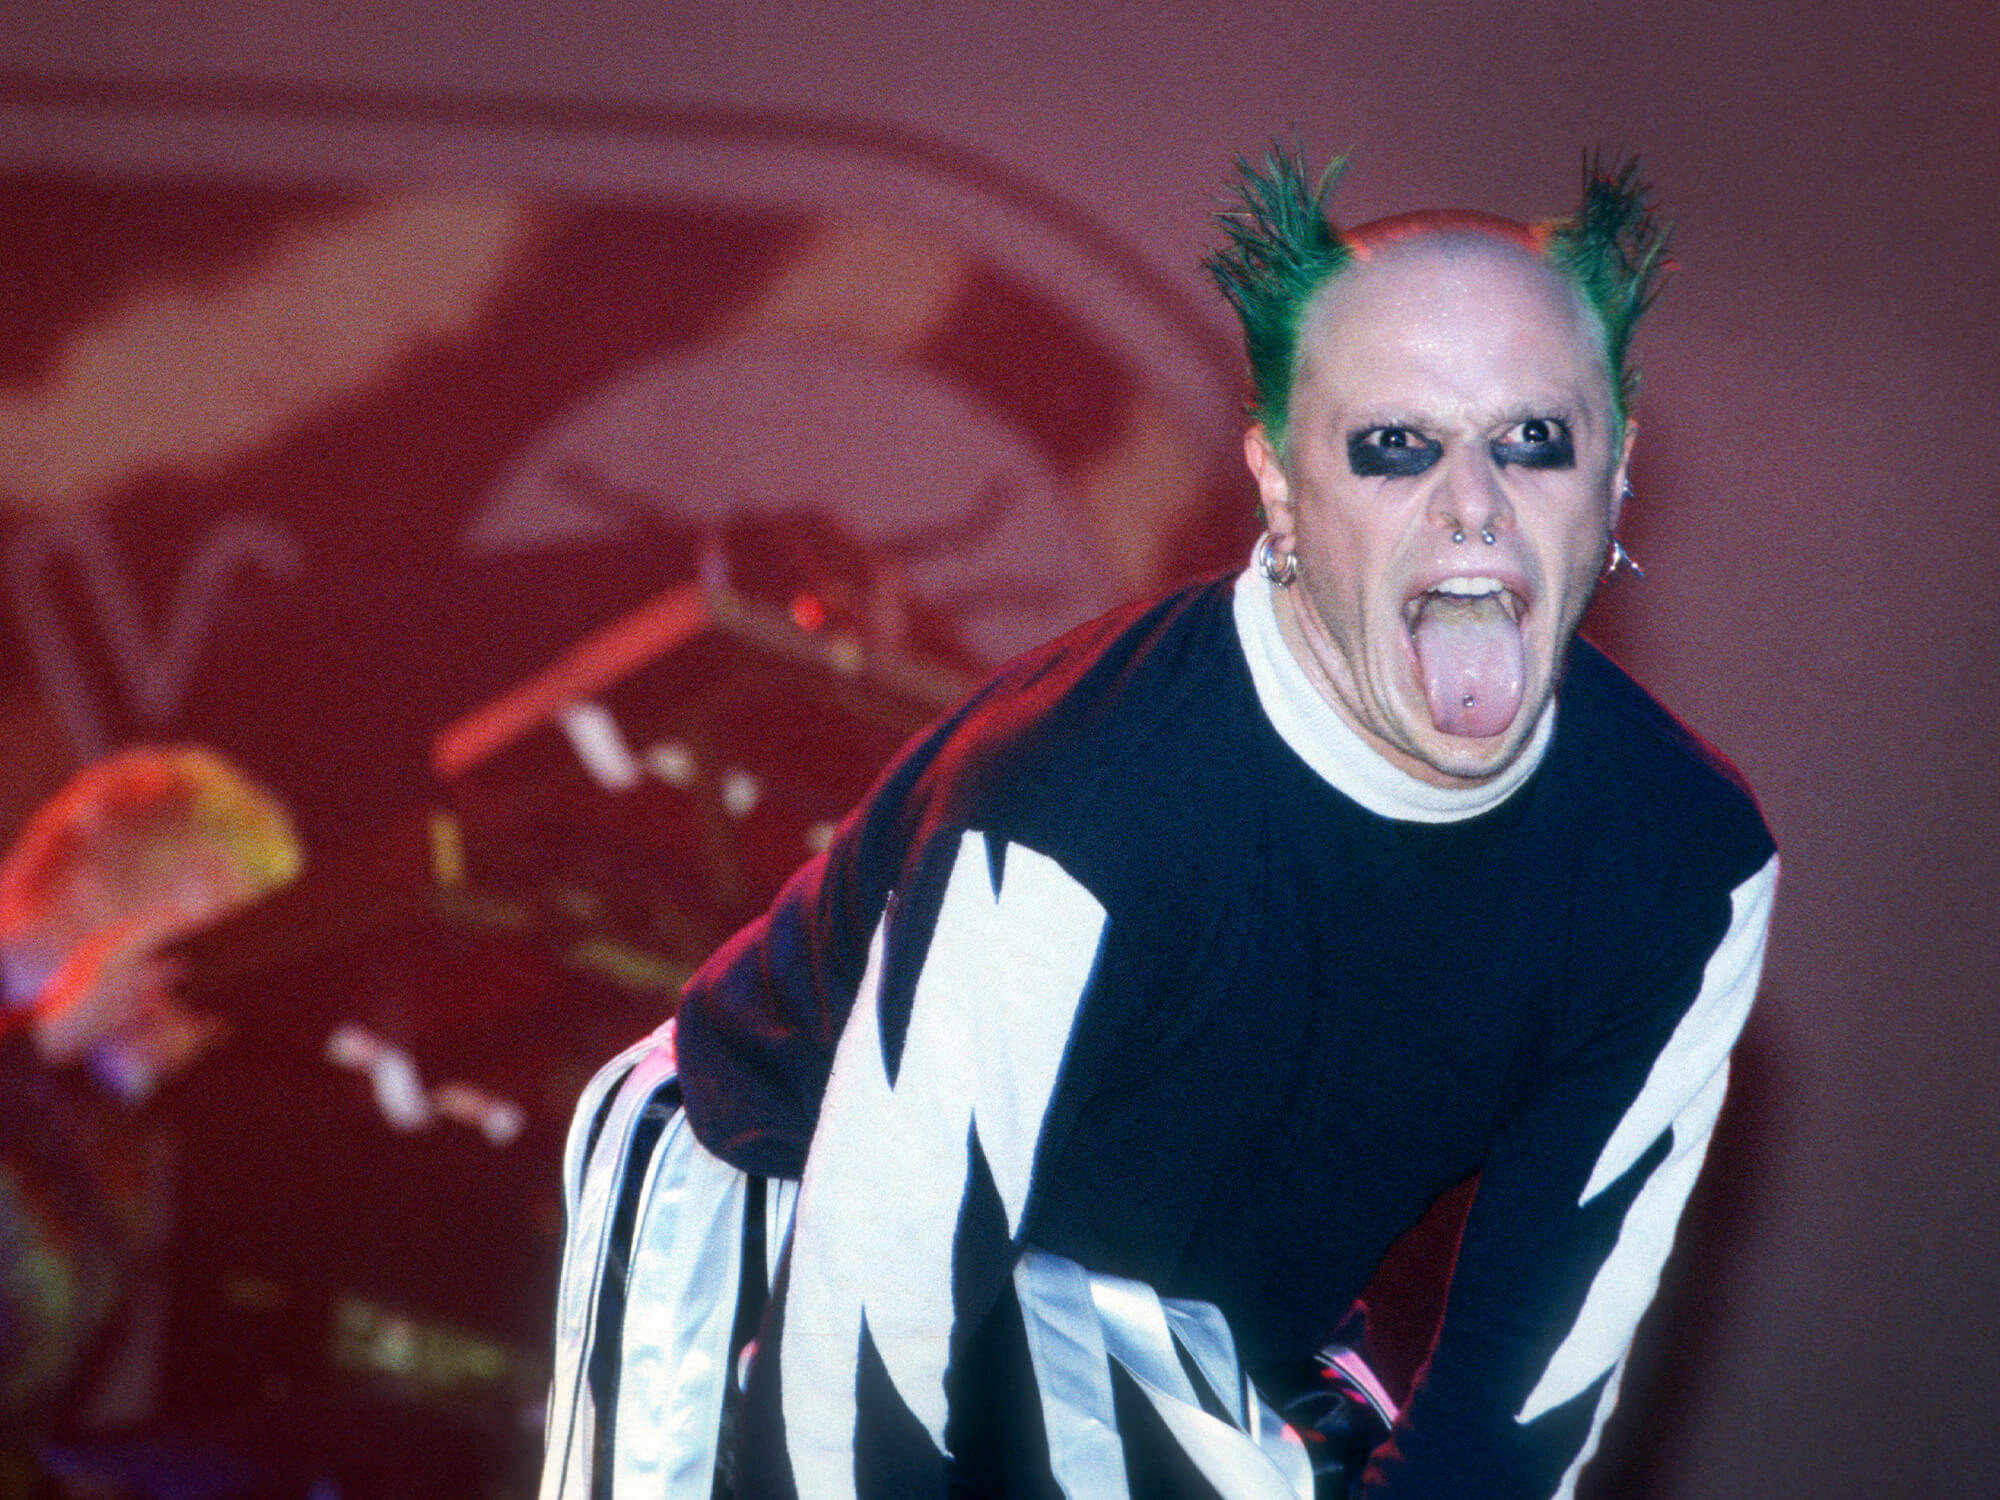 Keith Flint of The Prodigy. He is captured on stage sticking his tongue out